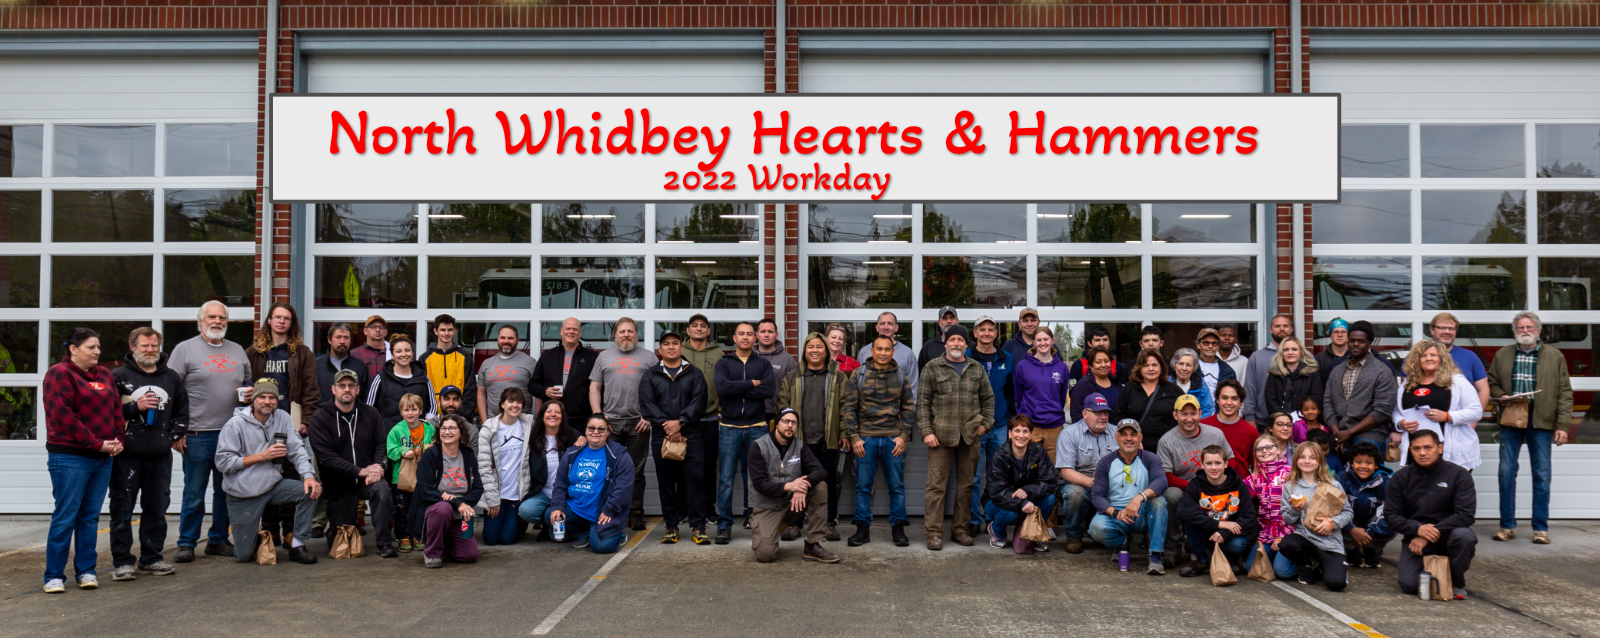 2022 North Whidbey Hearts and Hammers workday volunteers